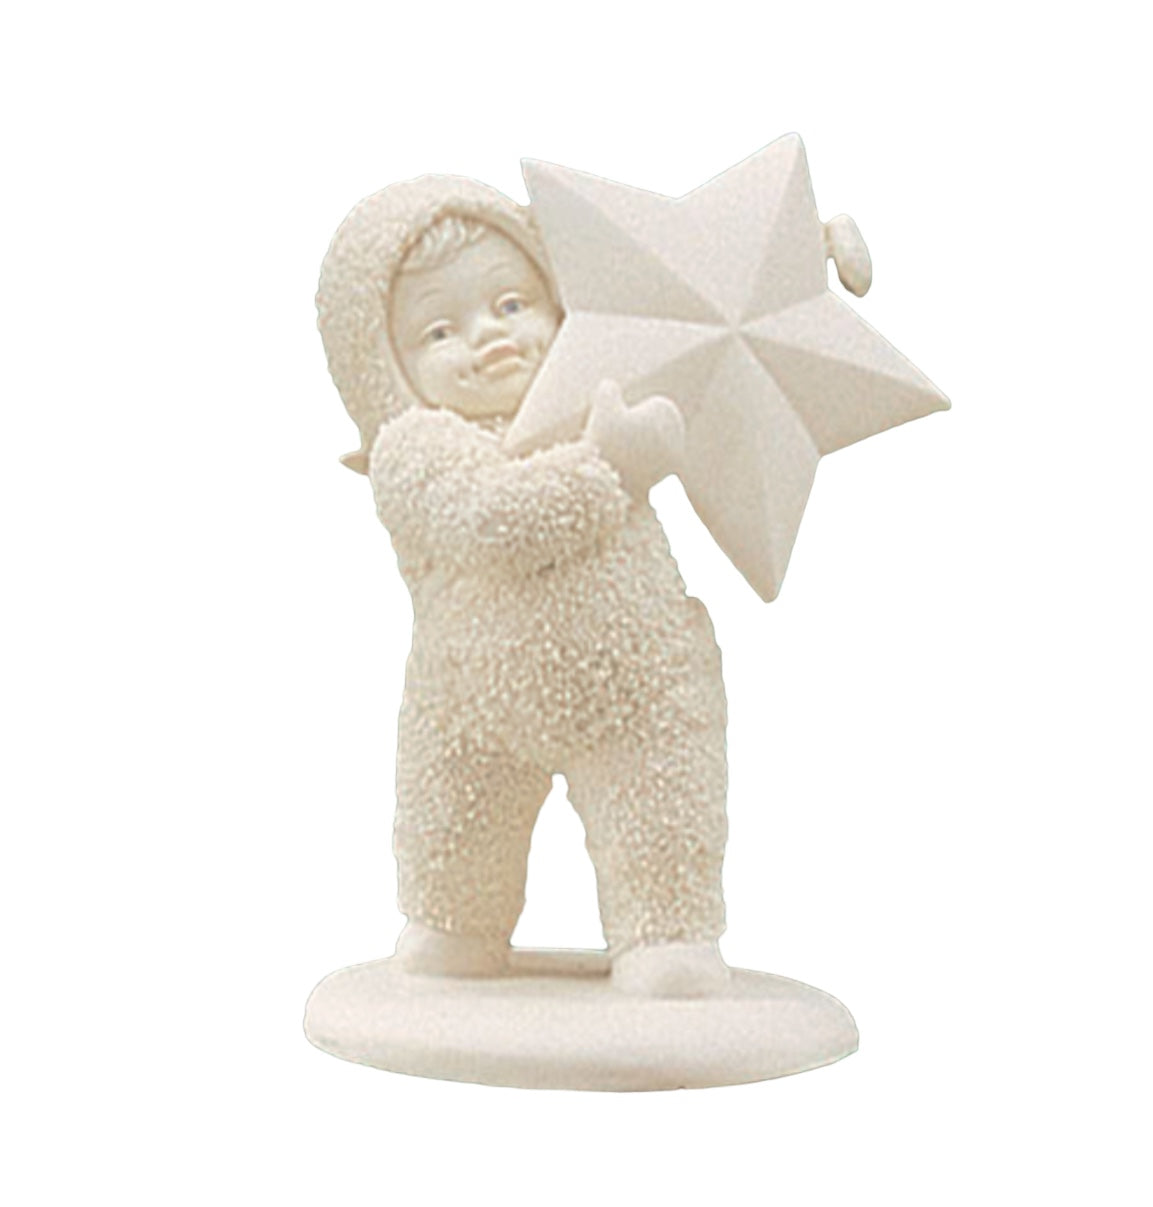 Snowbabies - I Found The Biggest Star Of All! Figurine